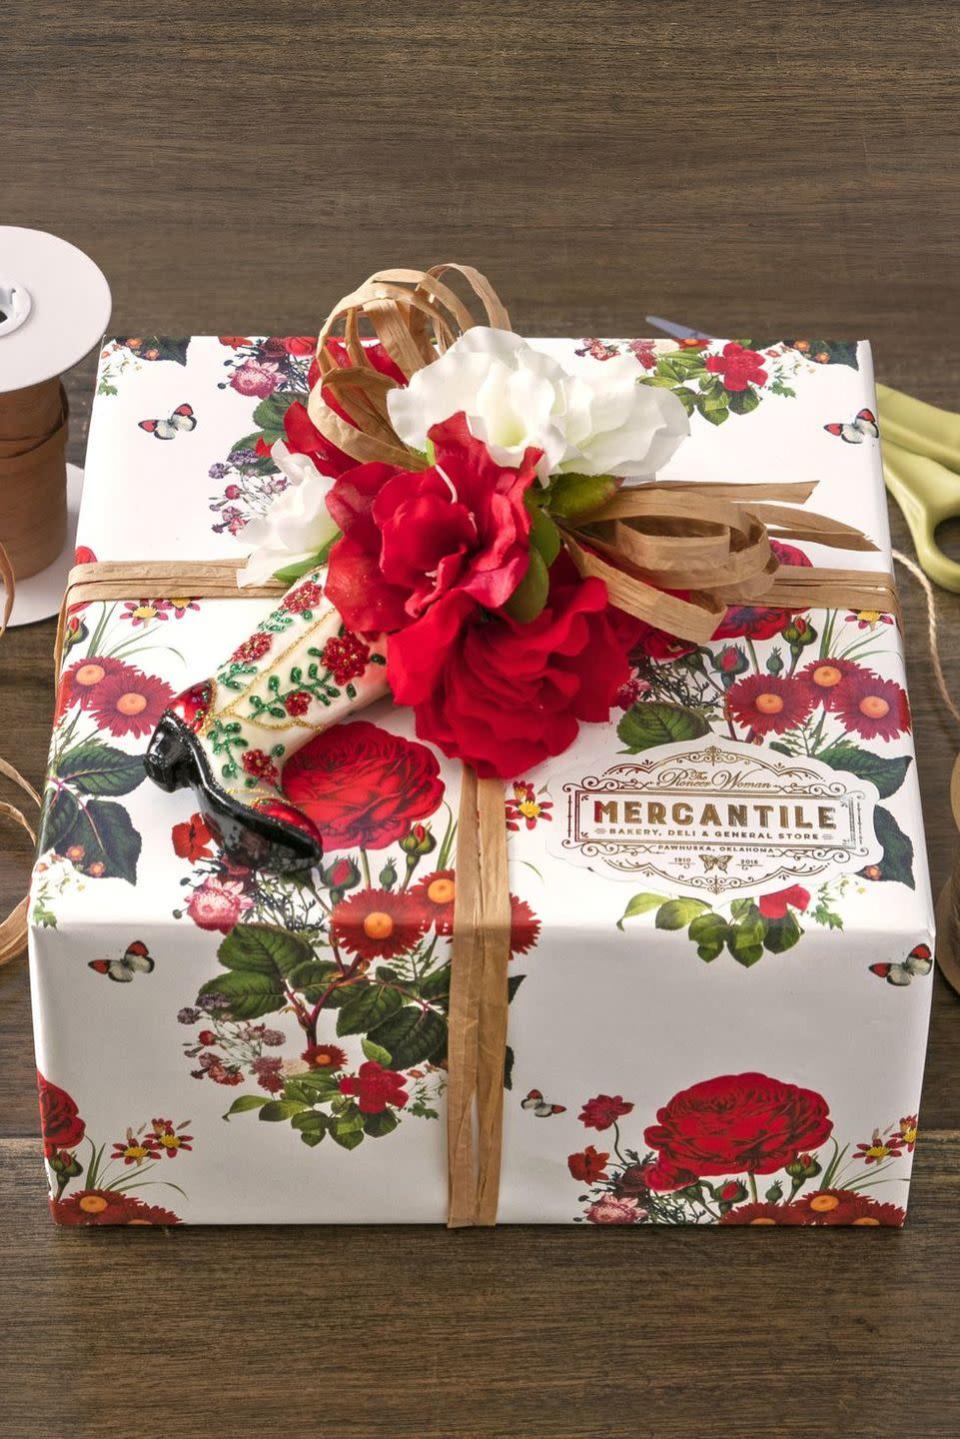 <p>Affix faux flowers in Christmas colors and a matching ornament to your beautifully wrapped gift. You can mimic this exact design that The Mercantile created for guests.</p>